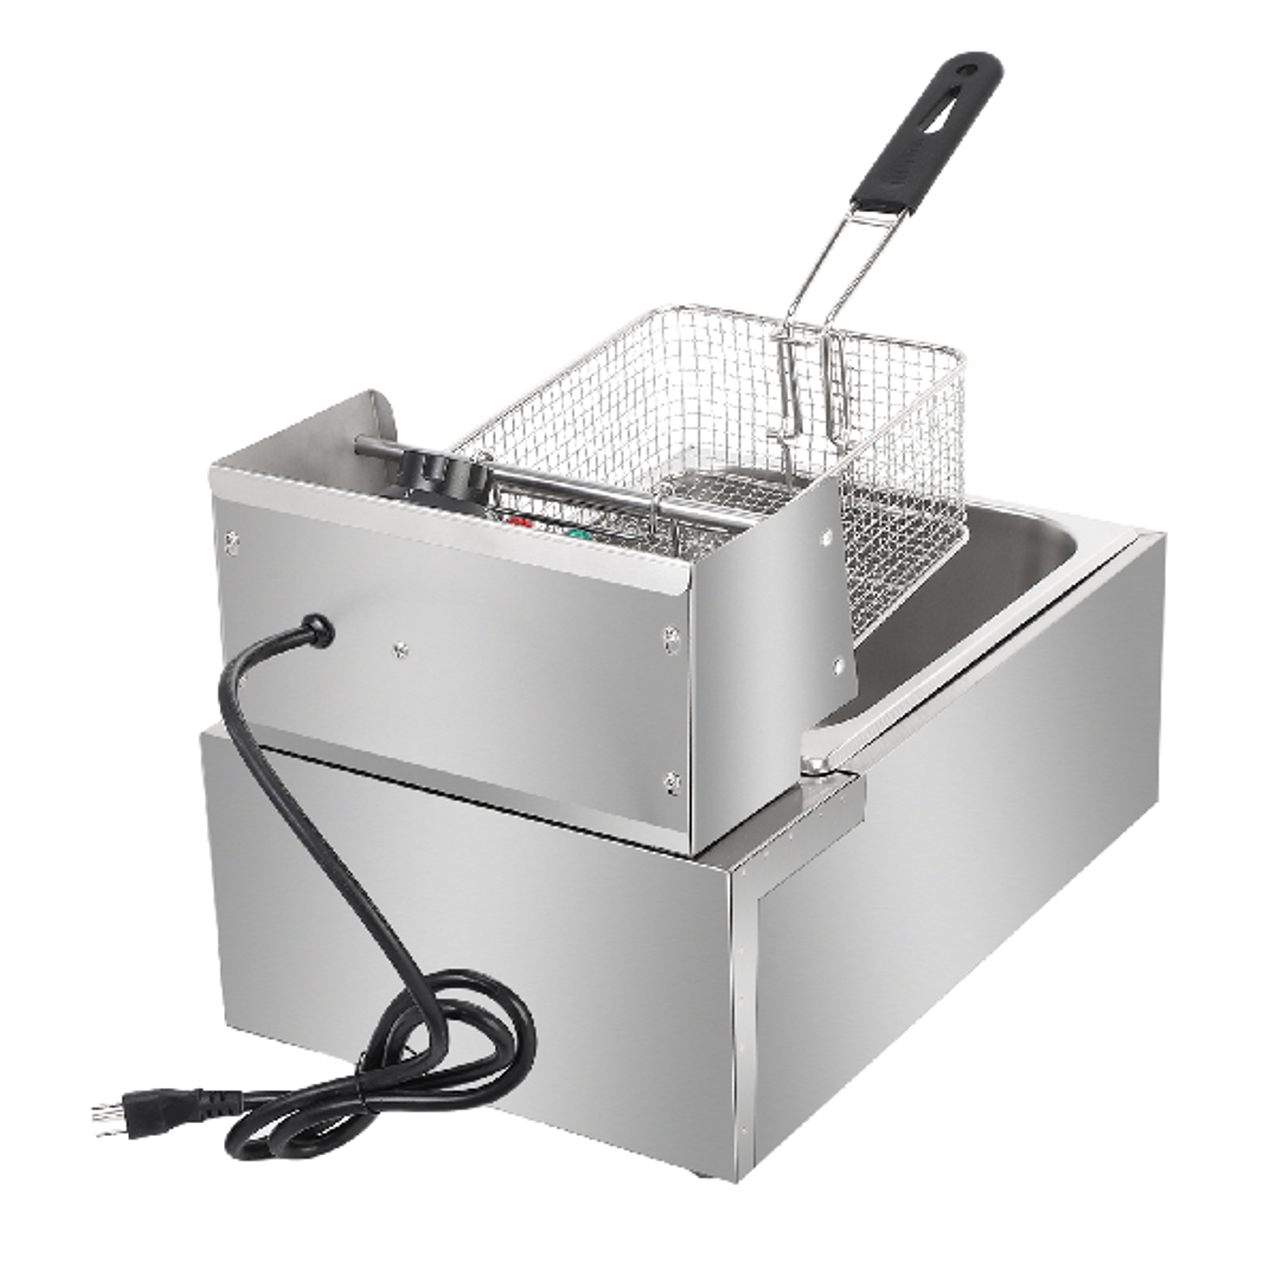 Stainless Steel 2,500W 6.3-Quart Single-Cylinder Electric Fryer product image